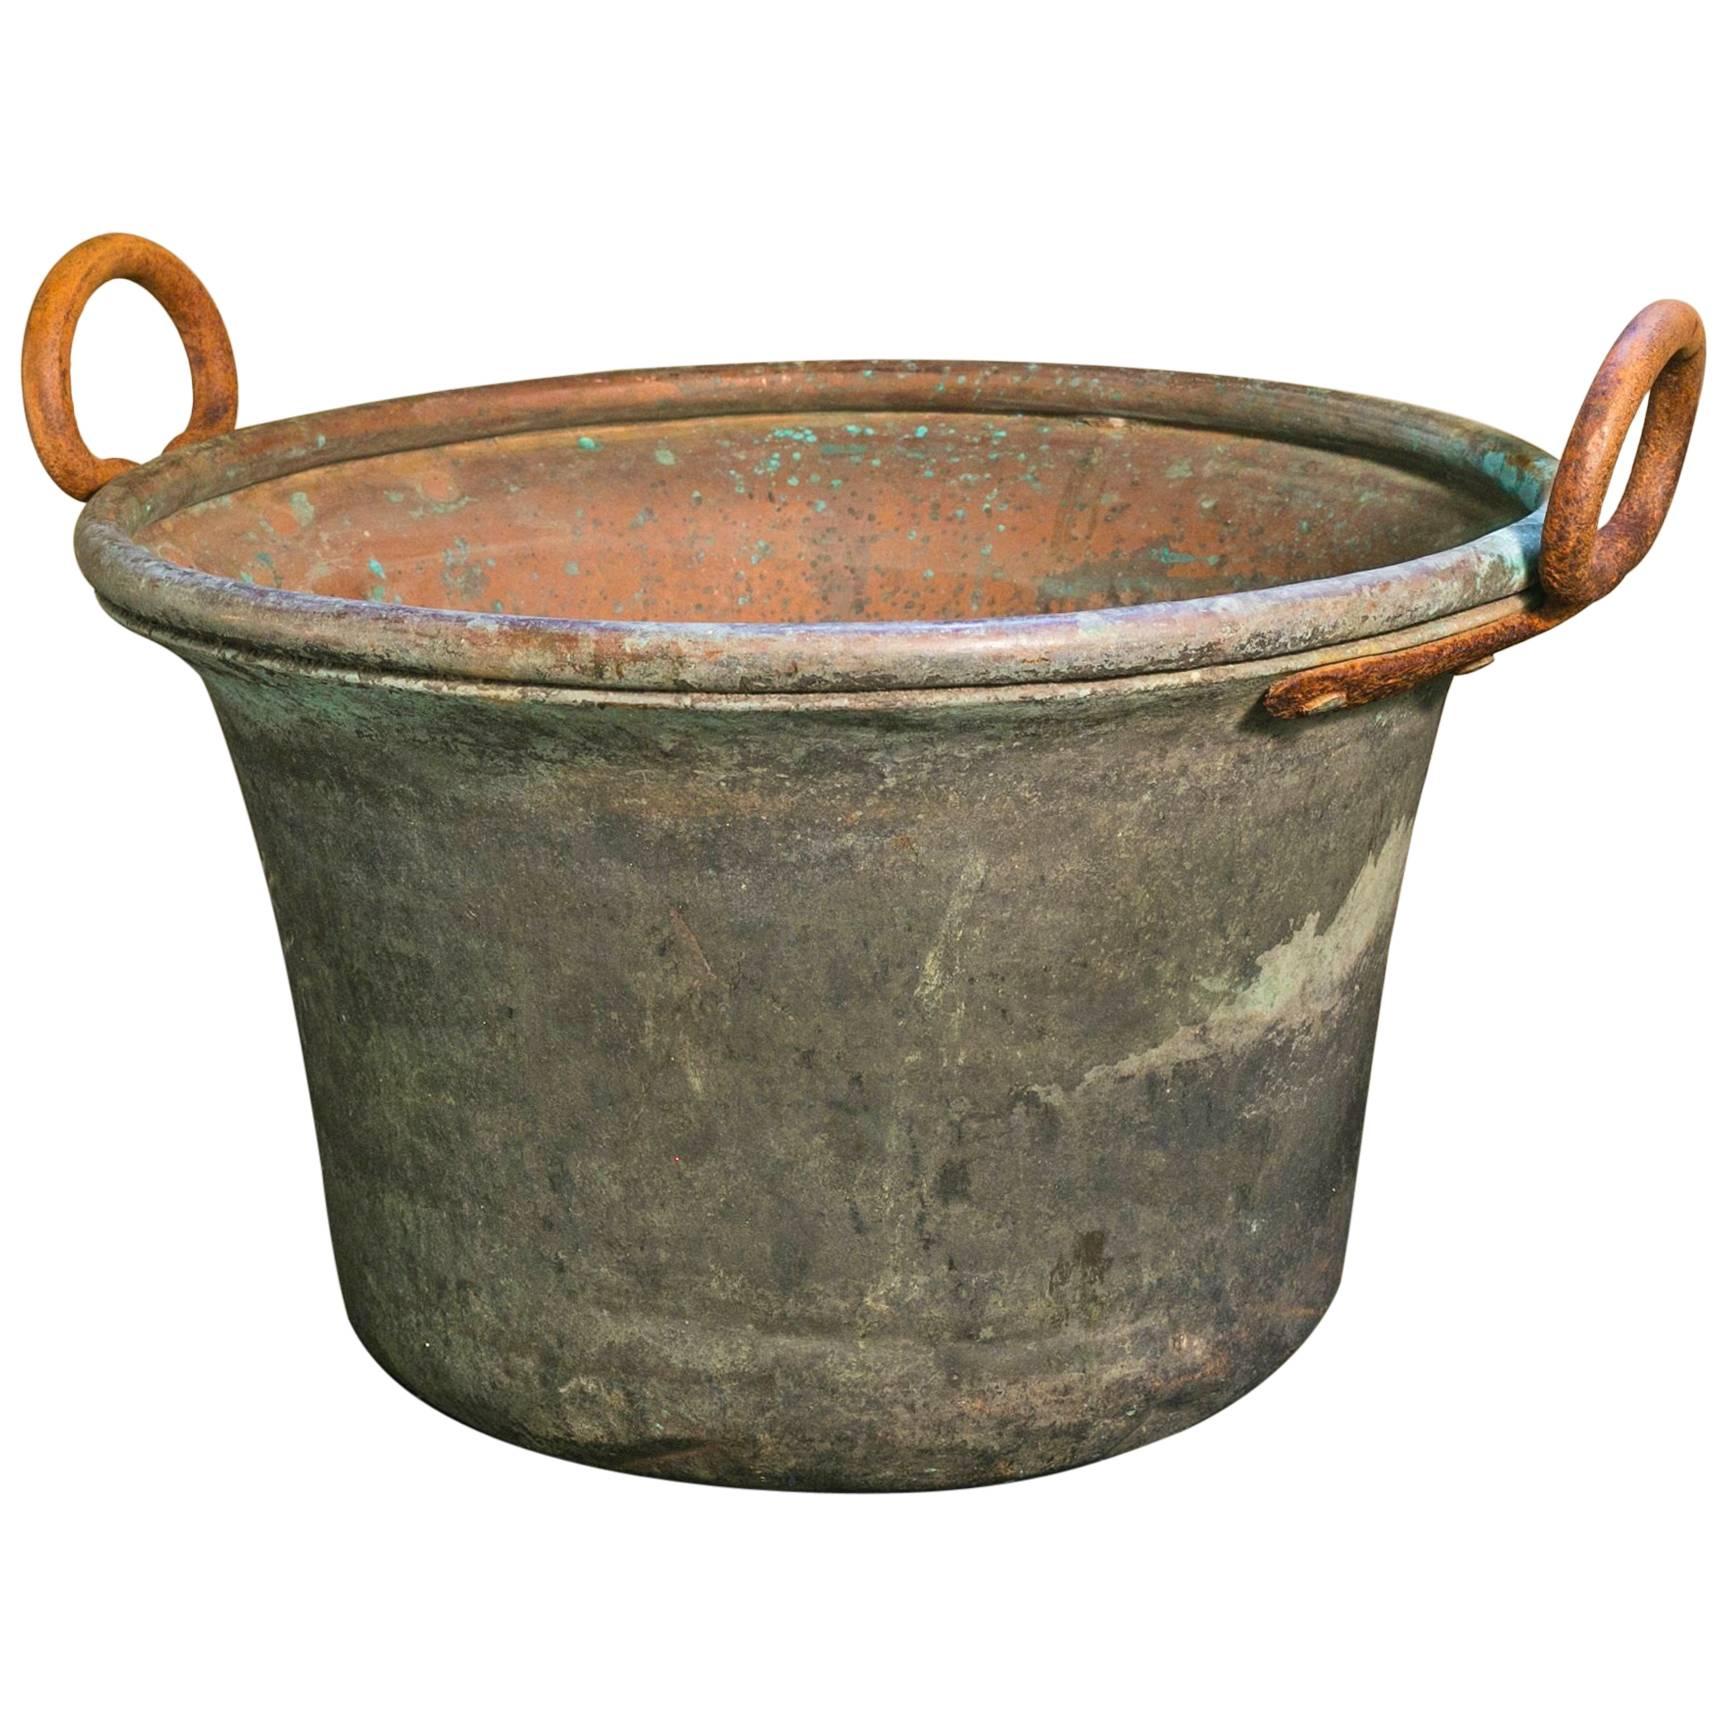 Copper Buckets with Iron Handles from France, circa 1890